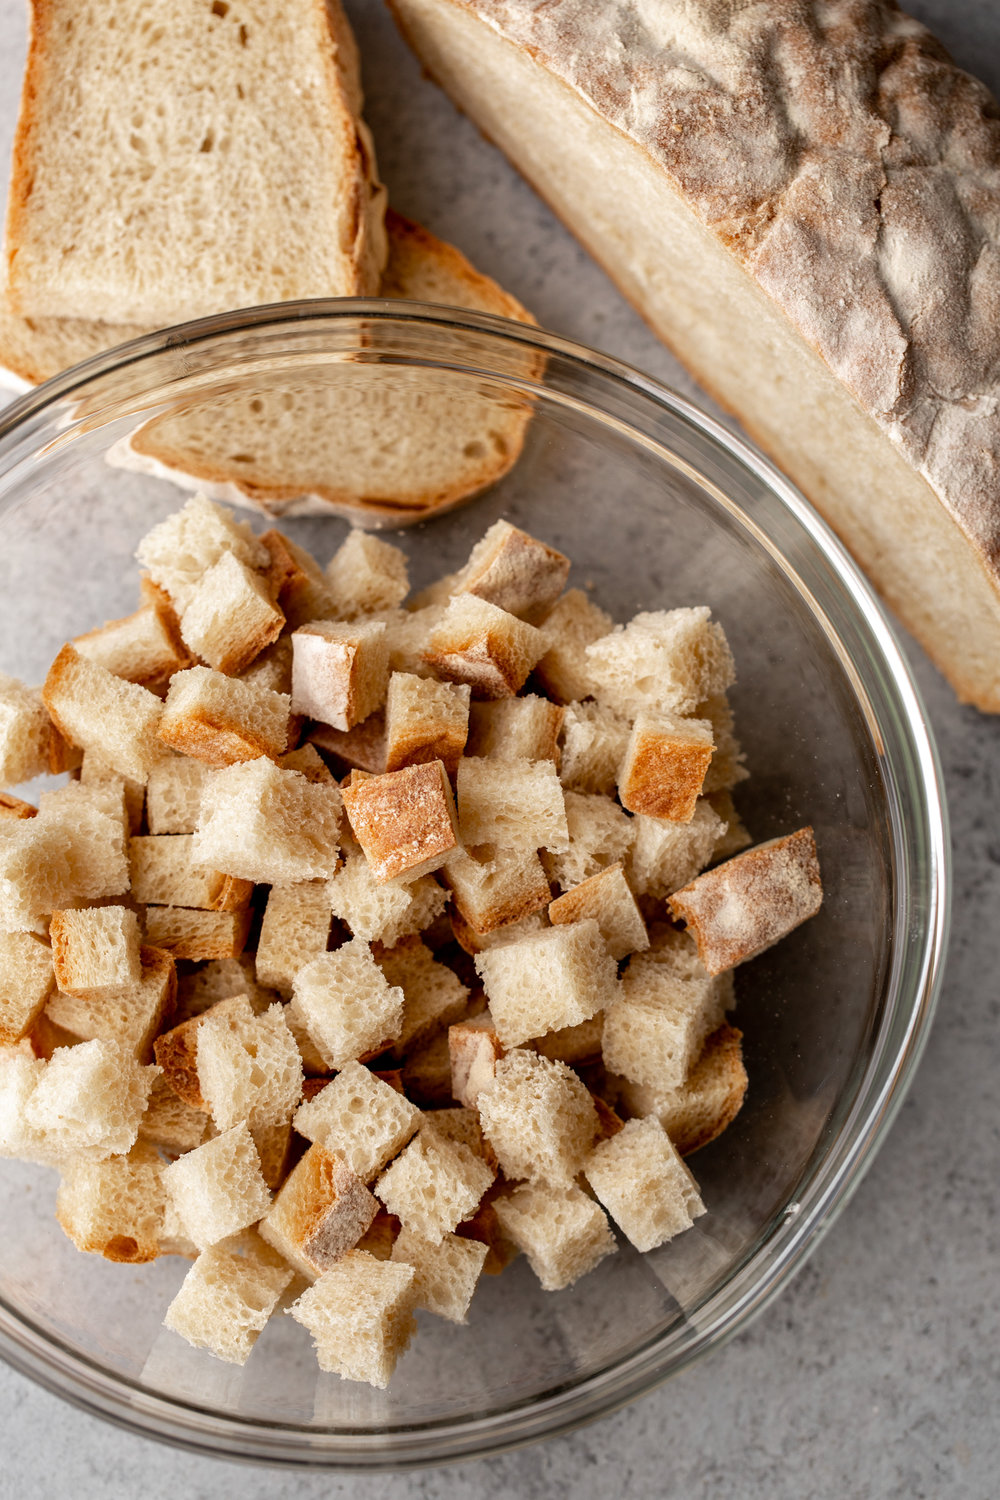 diced bread for croutons